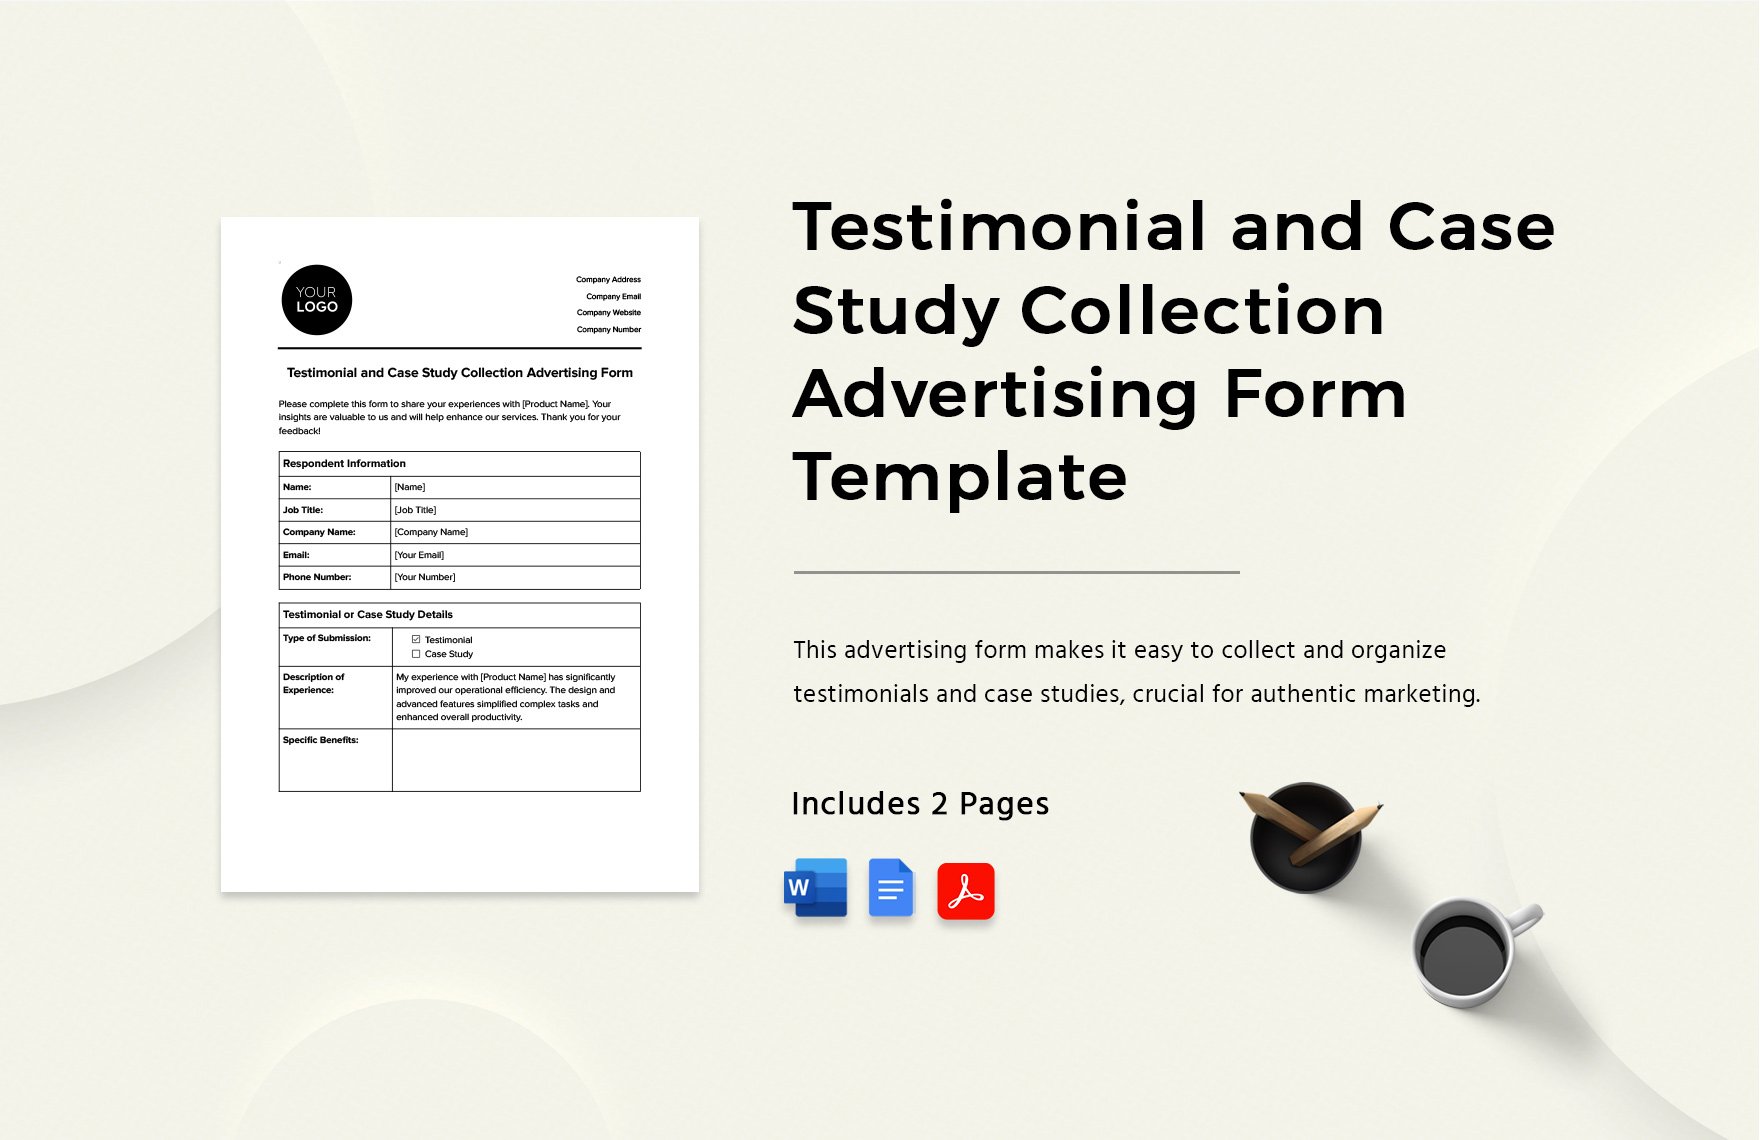 Testimonial and Case Study Collection Advertising Form Template